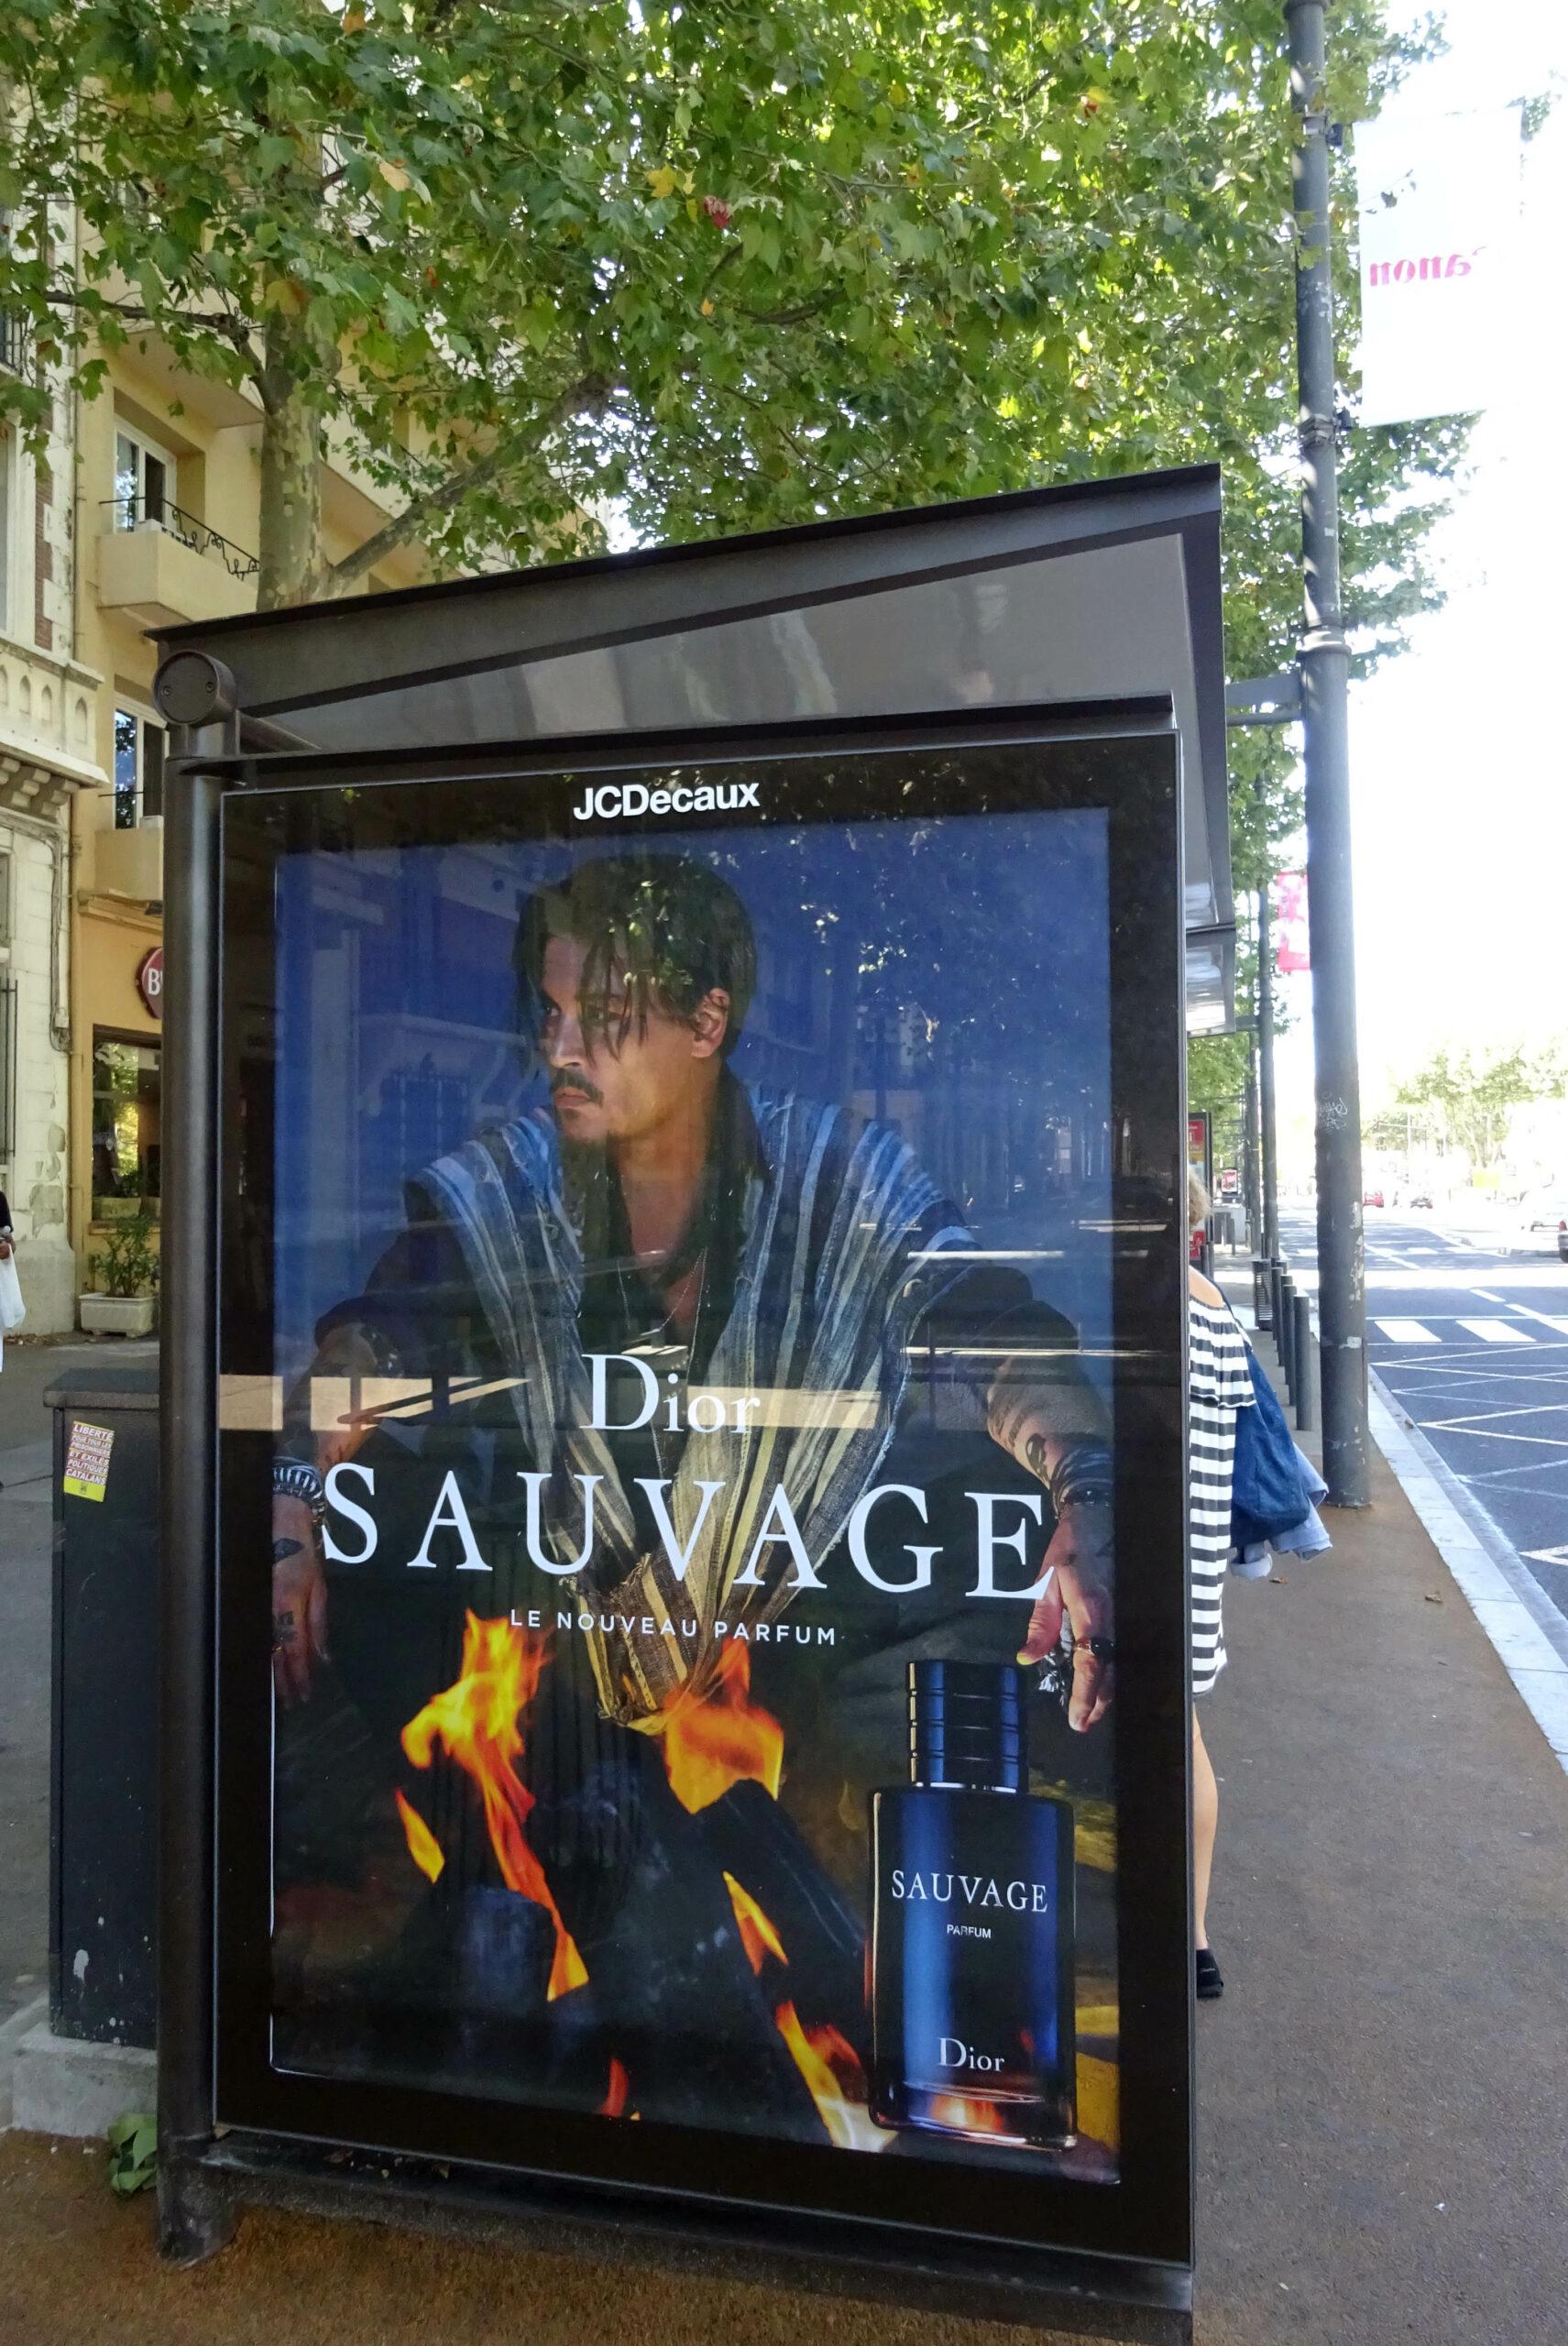 Johnny Depp Dior Sauvage Perfume Advert billboard on a bus stop in Perpignan France